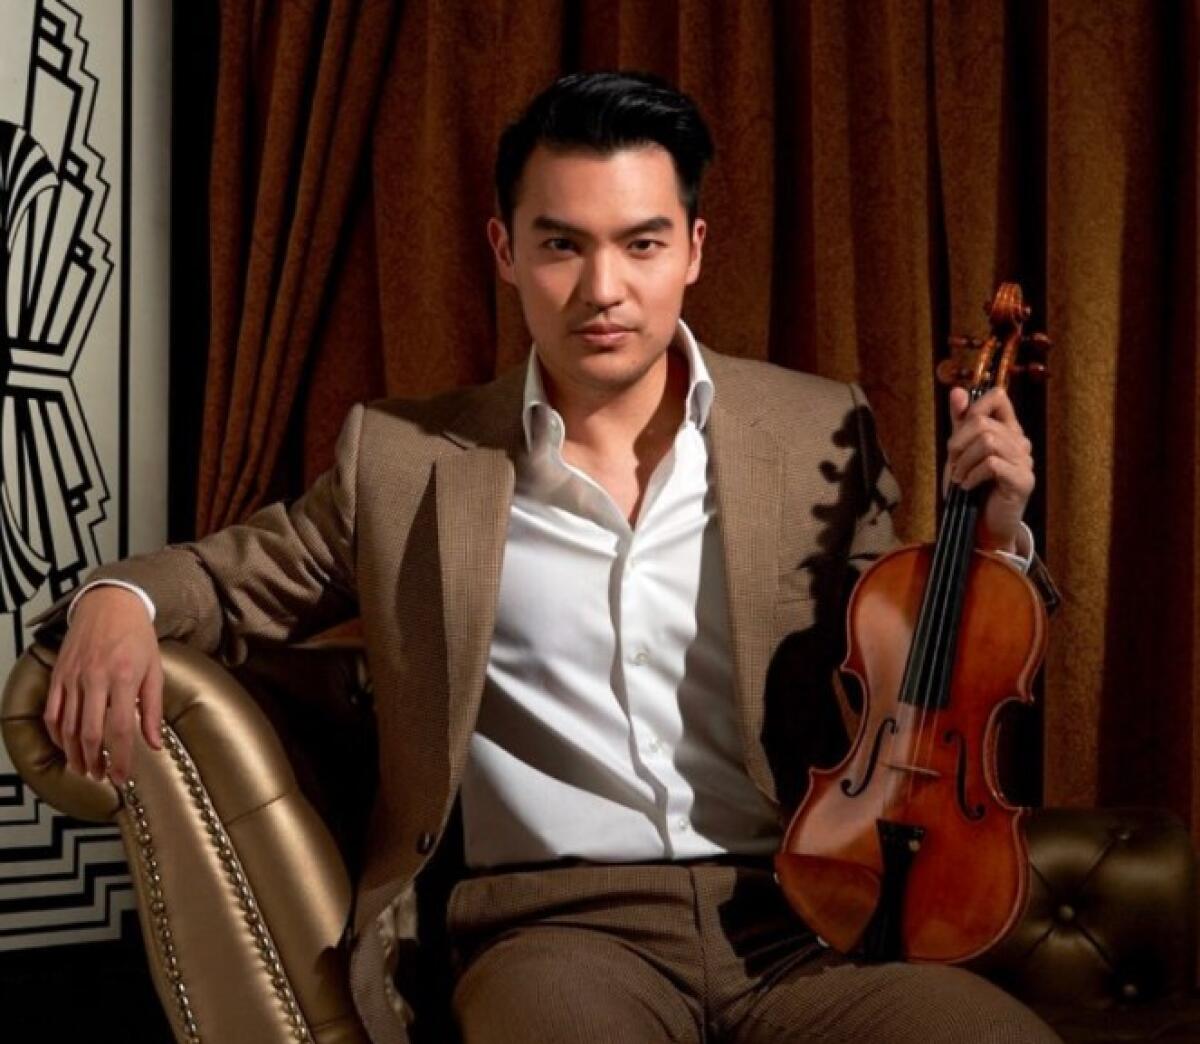 Violinist Ray Chen will perform Thursday, March 28, at the Baker-Baum Concert Hall in La Jolla.